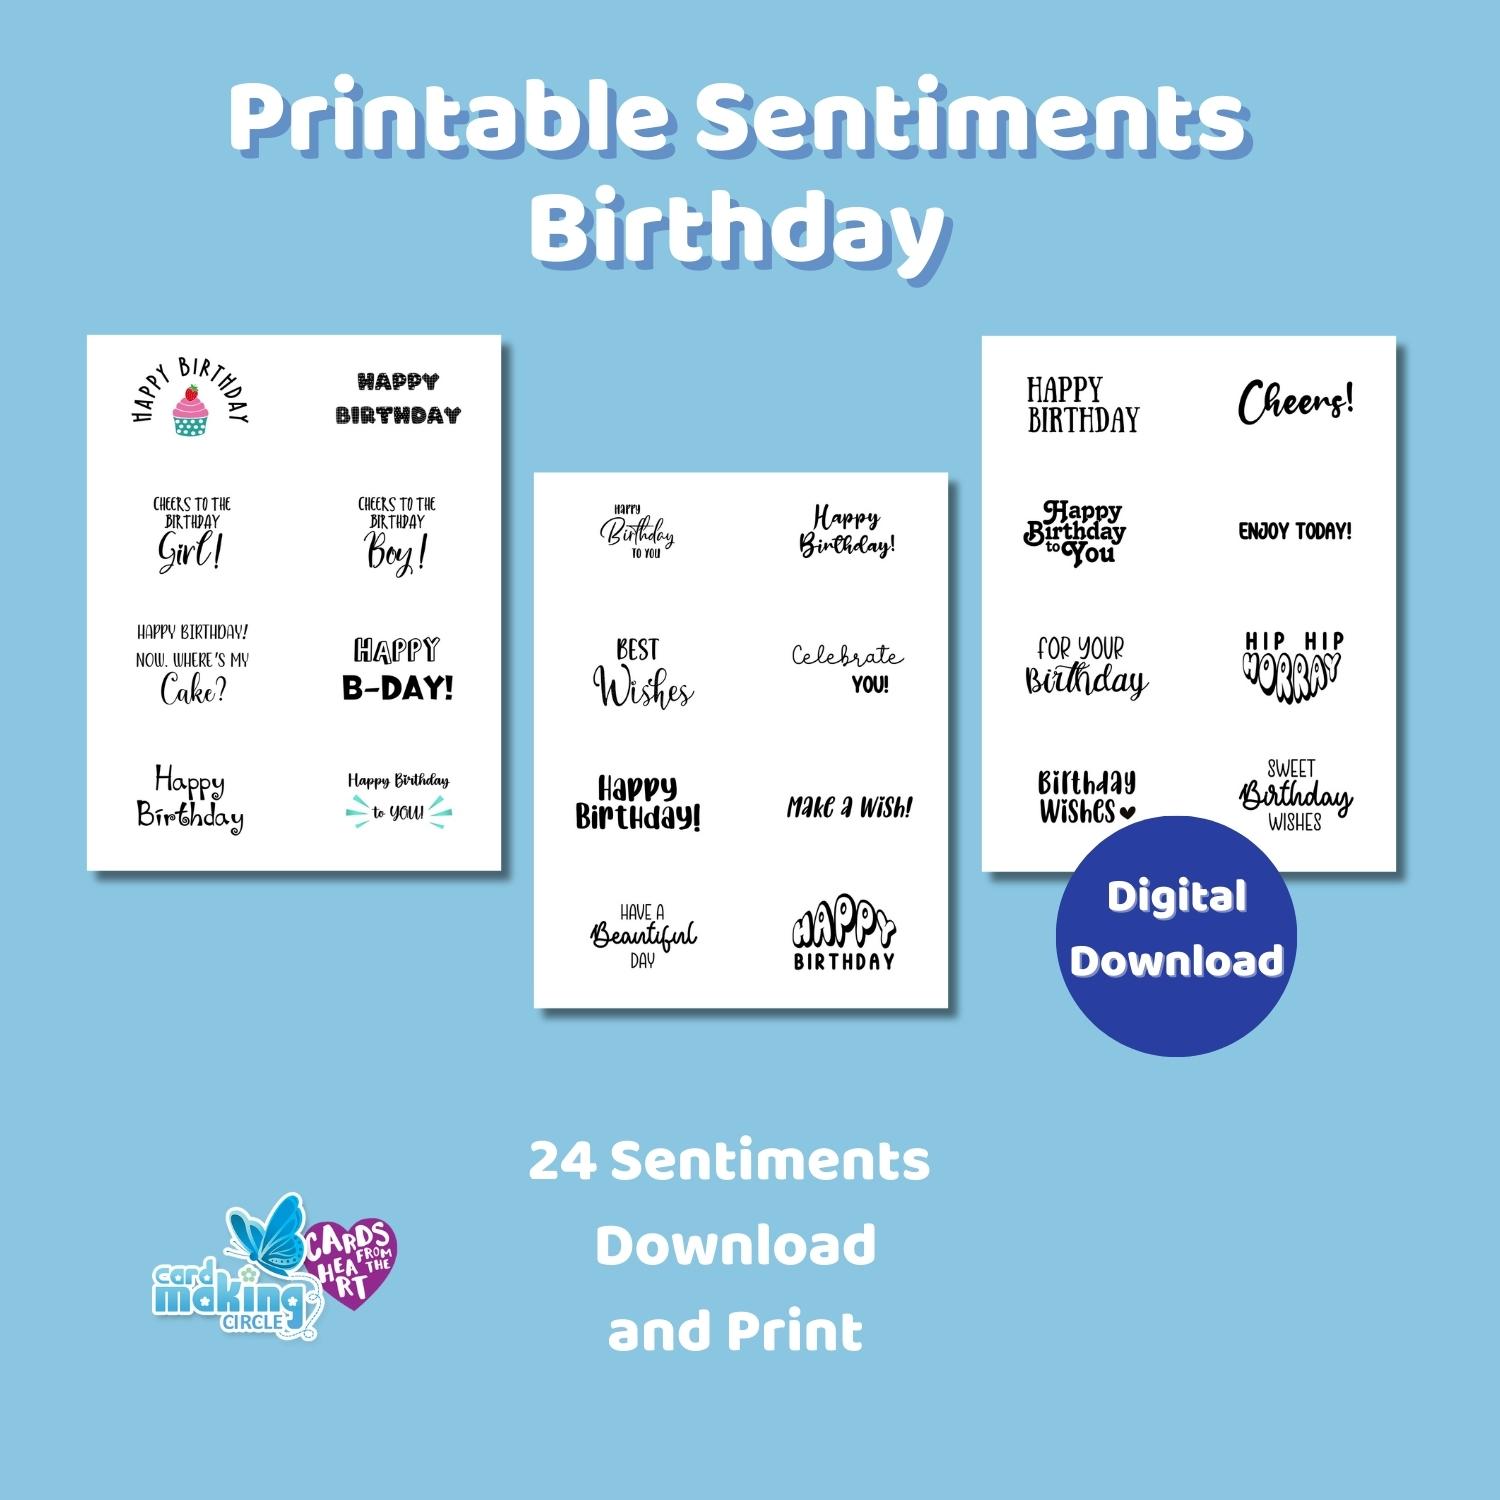 Birthday printable sentiments for you to download and print at home